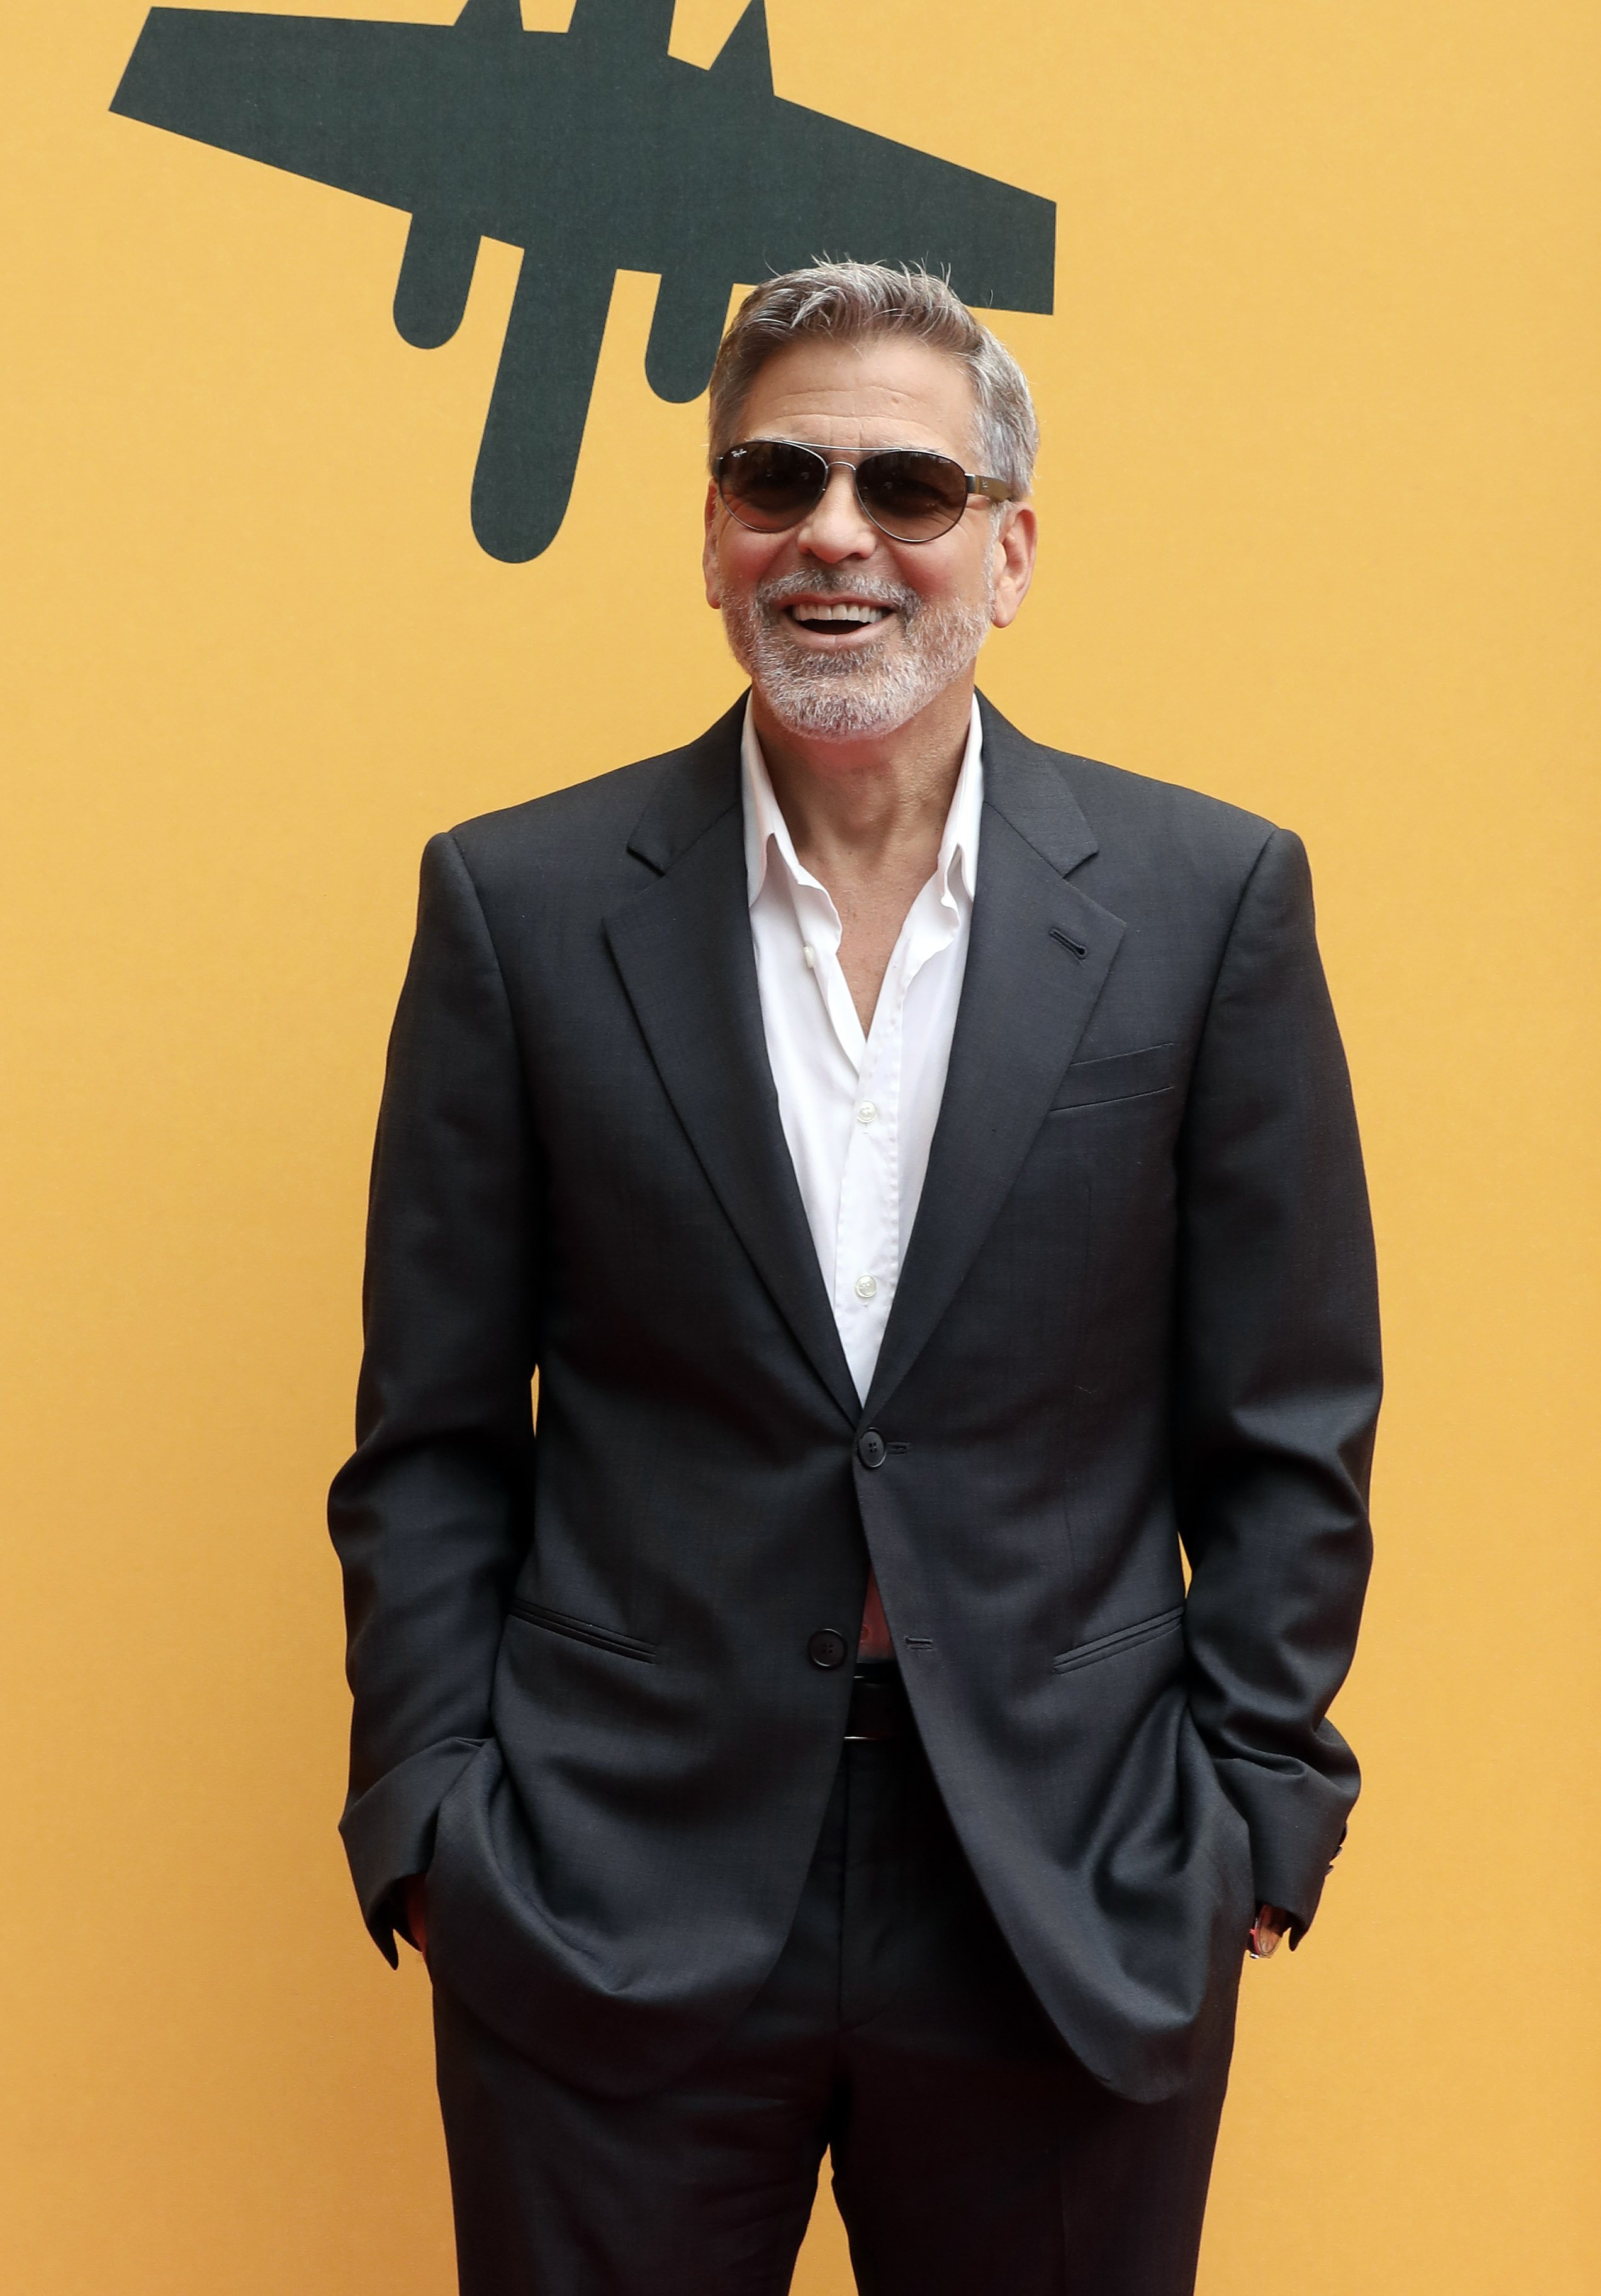 George Clooney at the "Catch-22" photocall at The Space Moderno Cinema on May 13, 2019, in Rome, Italy | Source: Getty Images